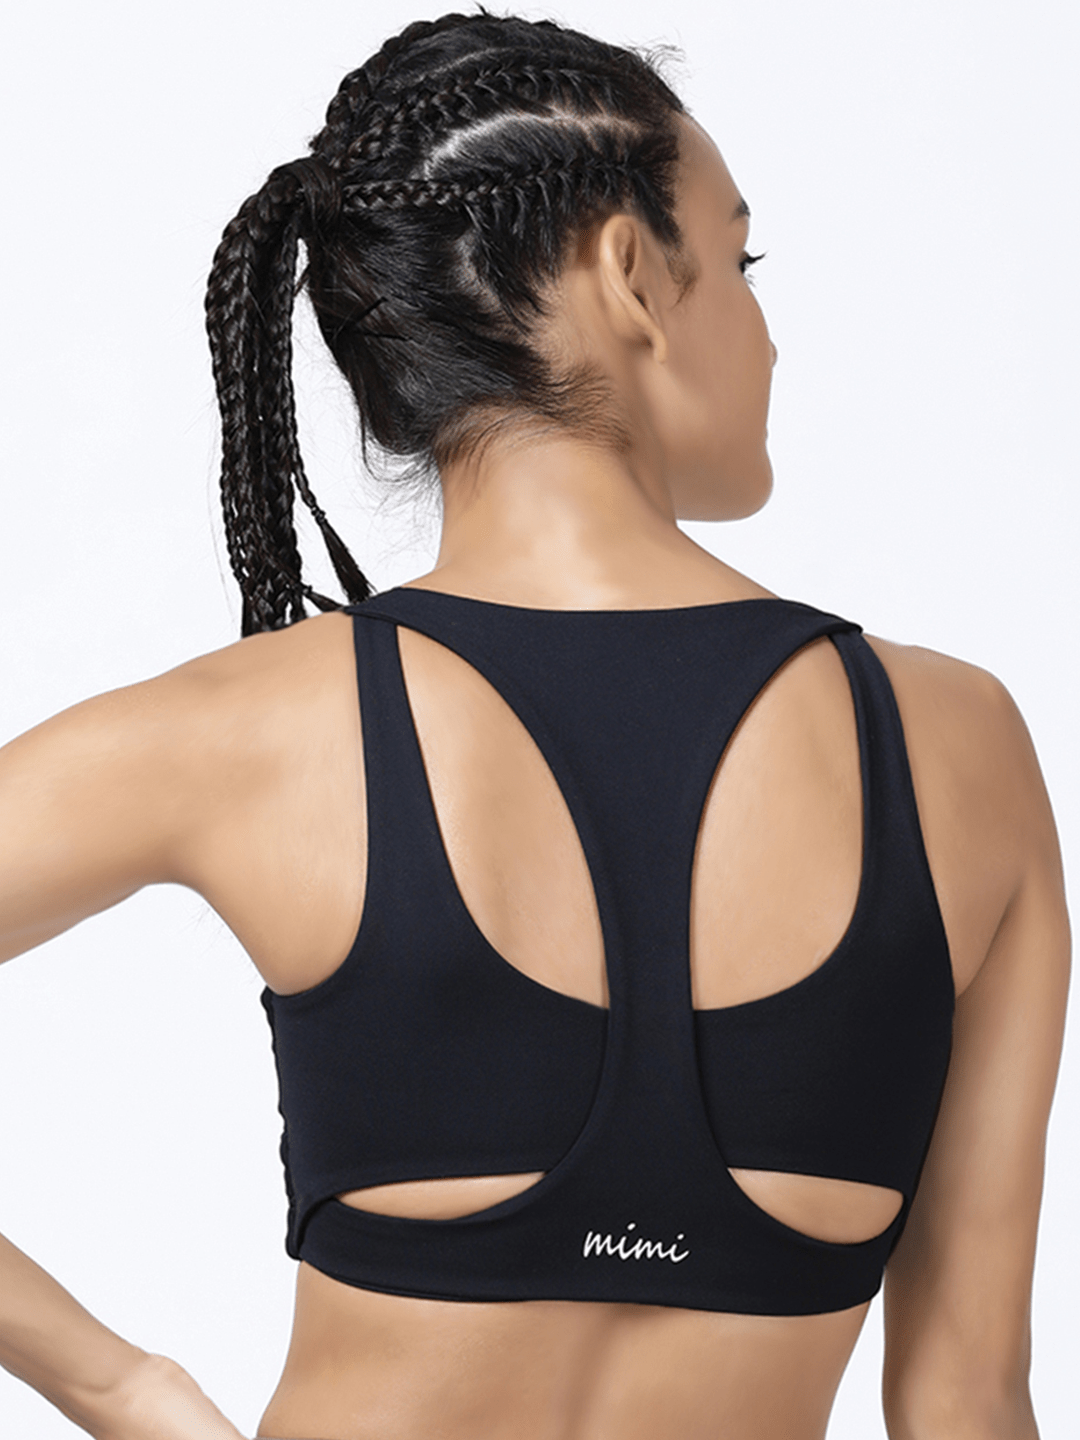 Mimi by Michelle Salins High Support Racer Back Nylon Sports Bra For Women - Black